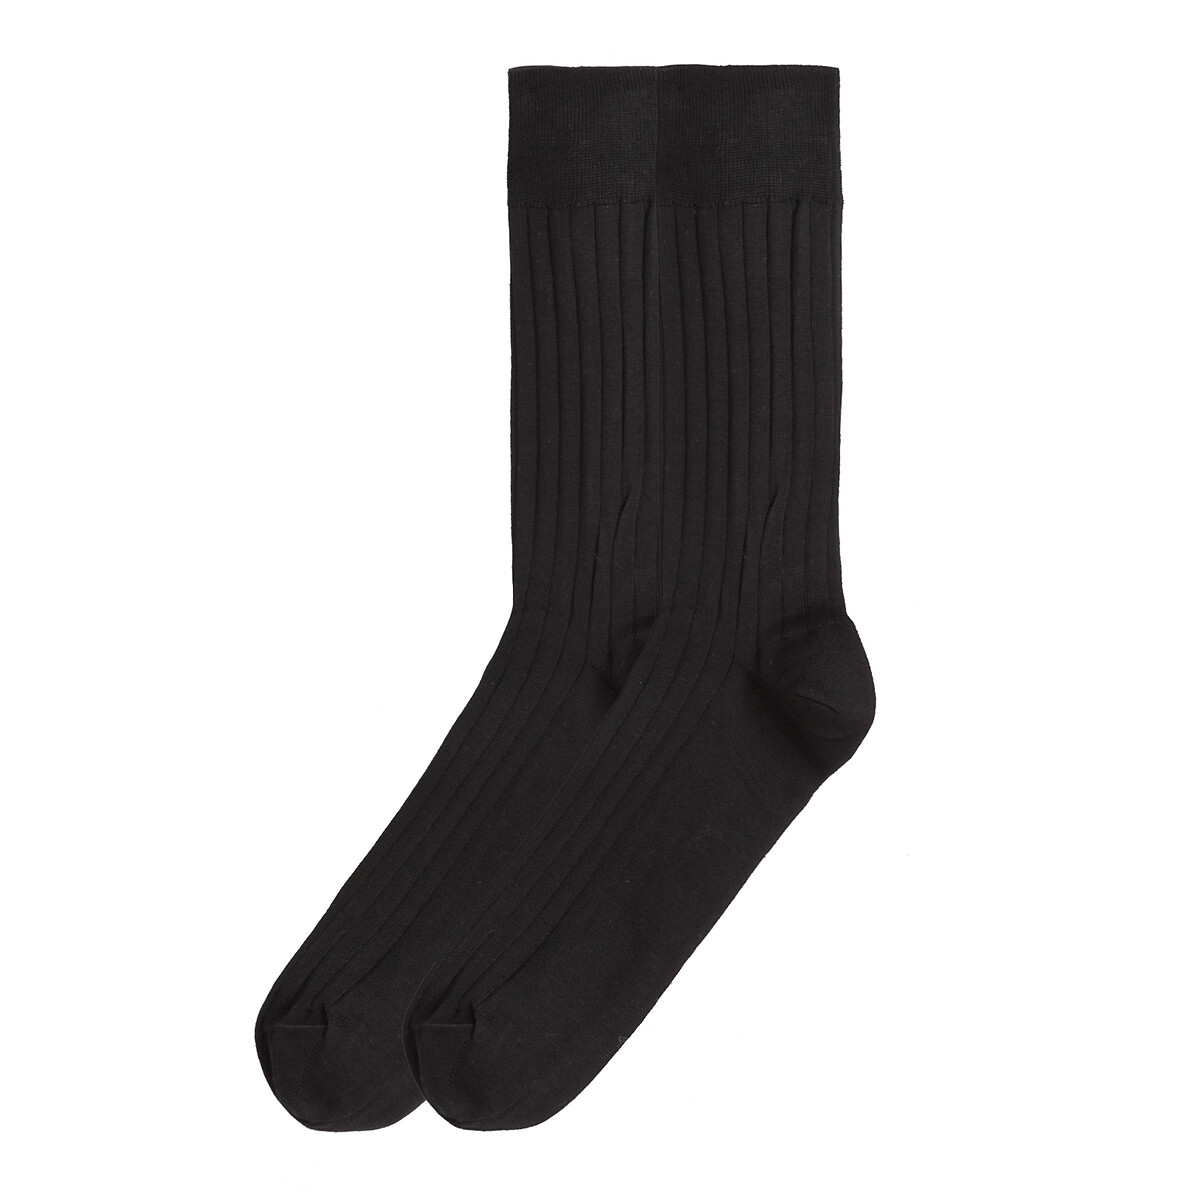 Image of Pack of 2 Pairs of Socks in Lisle Cotton Mix